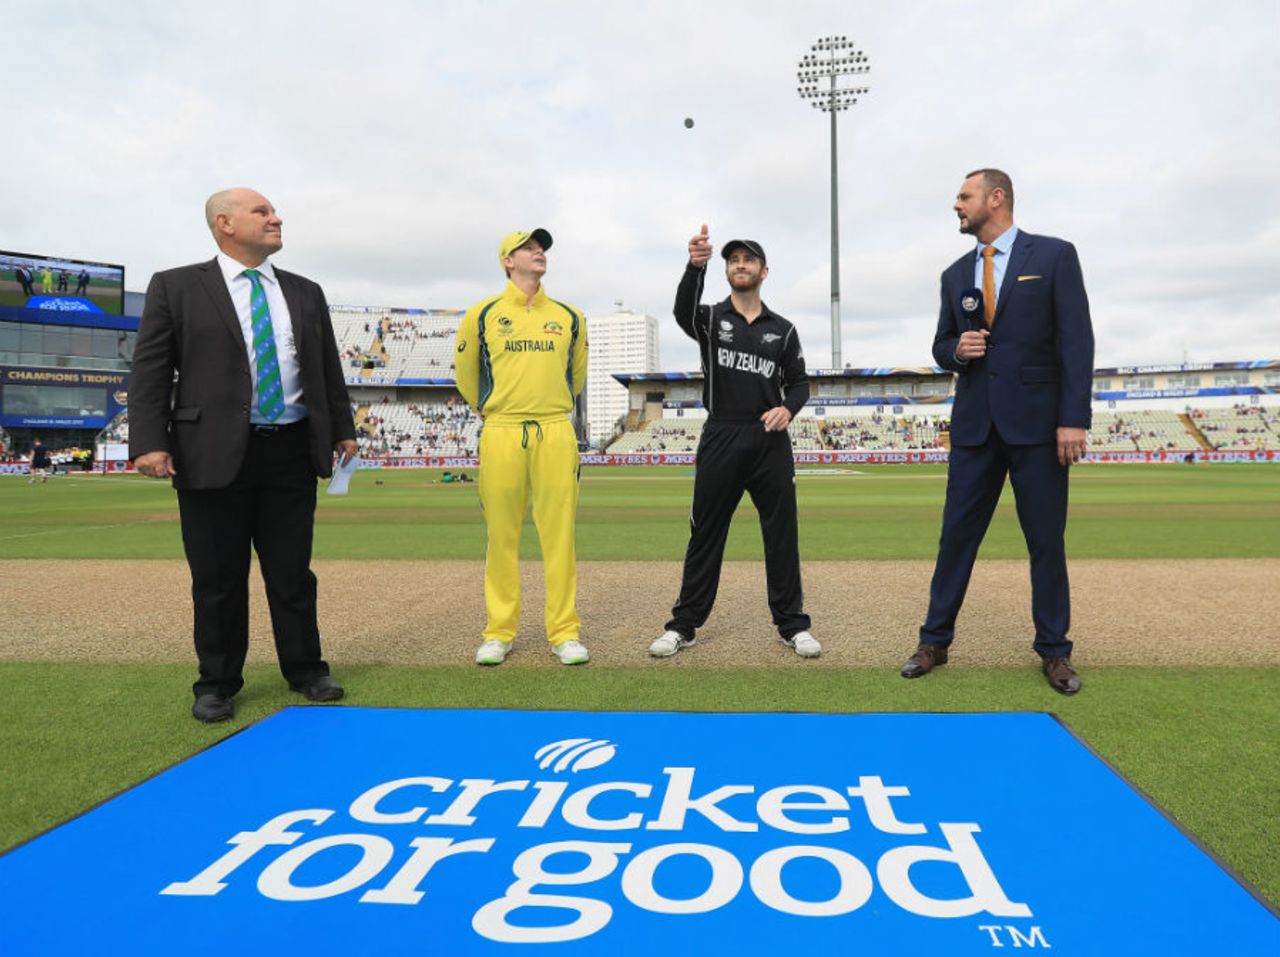 Both captains got what they wanted at the toss, Australia v New Zealand, Champions Trophy, Group A, Edgbaston, June 2, 2017